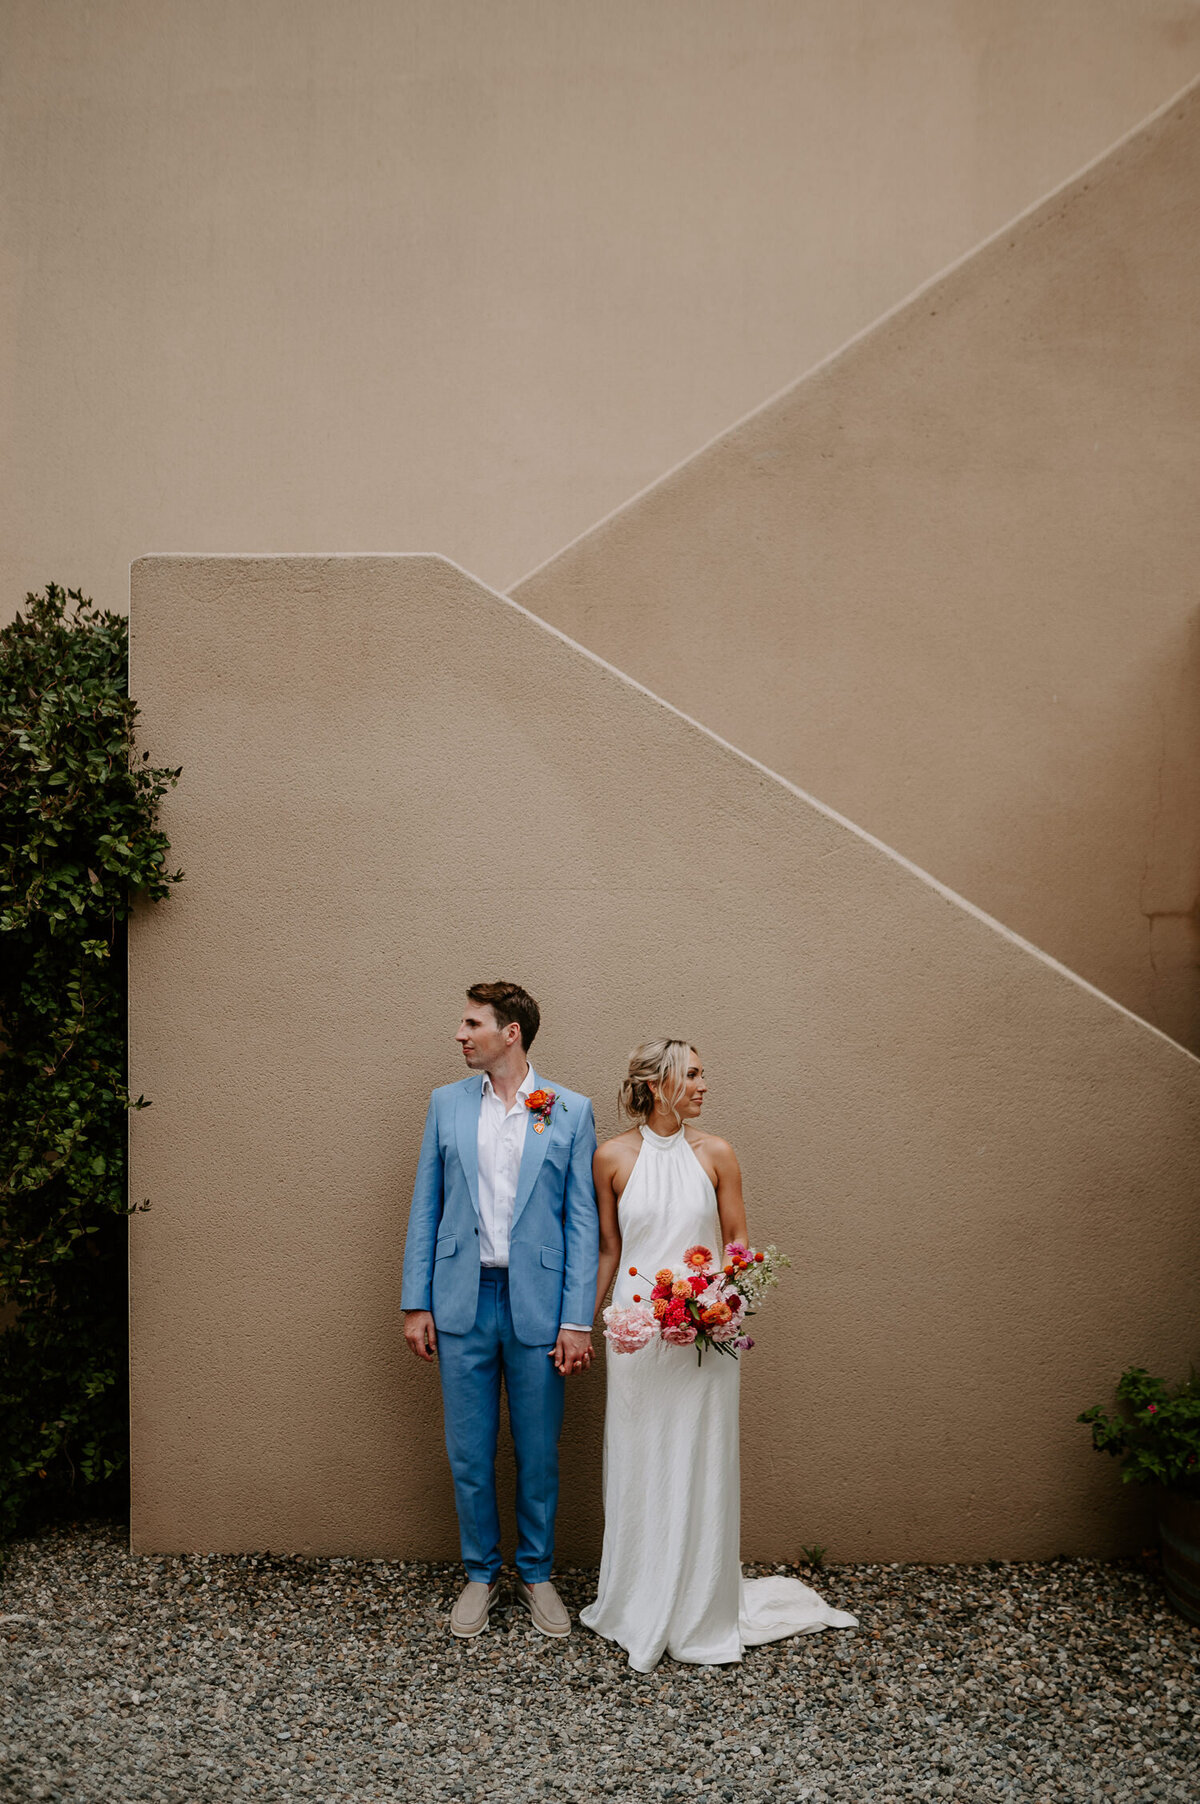 A bride and groom face away from each other next to a Wes Anderson looking set of stairs at Chateau Canet. The groom is wearing a blue suit and no tie where the brides dress is sleeveless as she is also carrying pink and orange flowers.